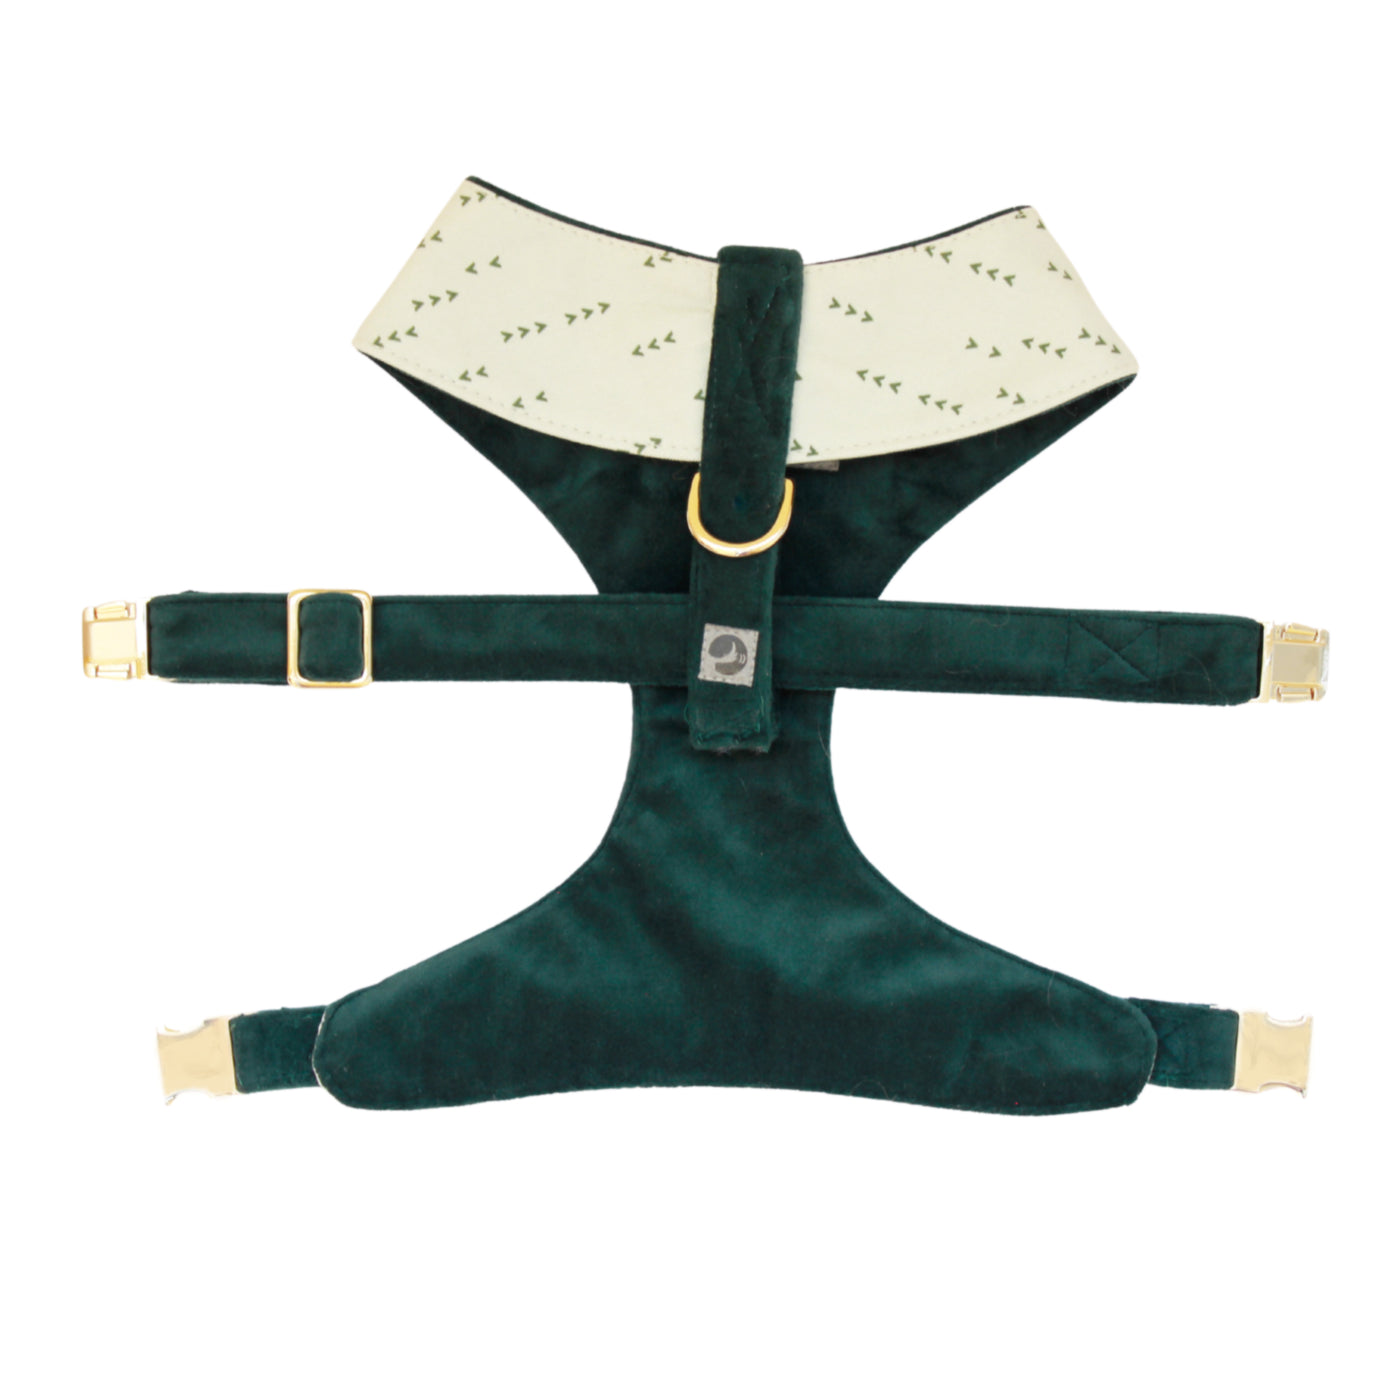 Top view of reversible dog harness with gold hardware in light green with dark green arrows